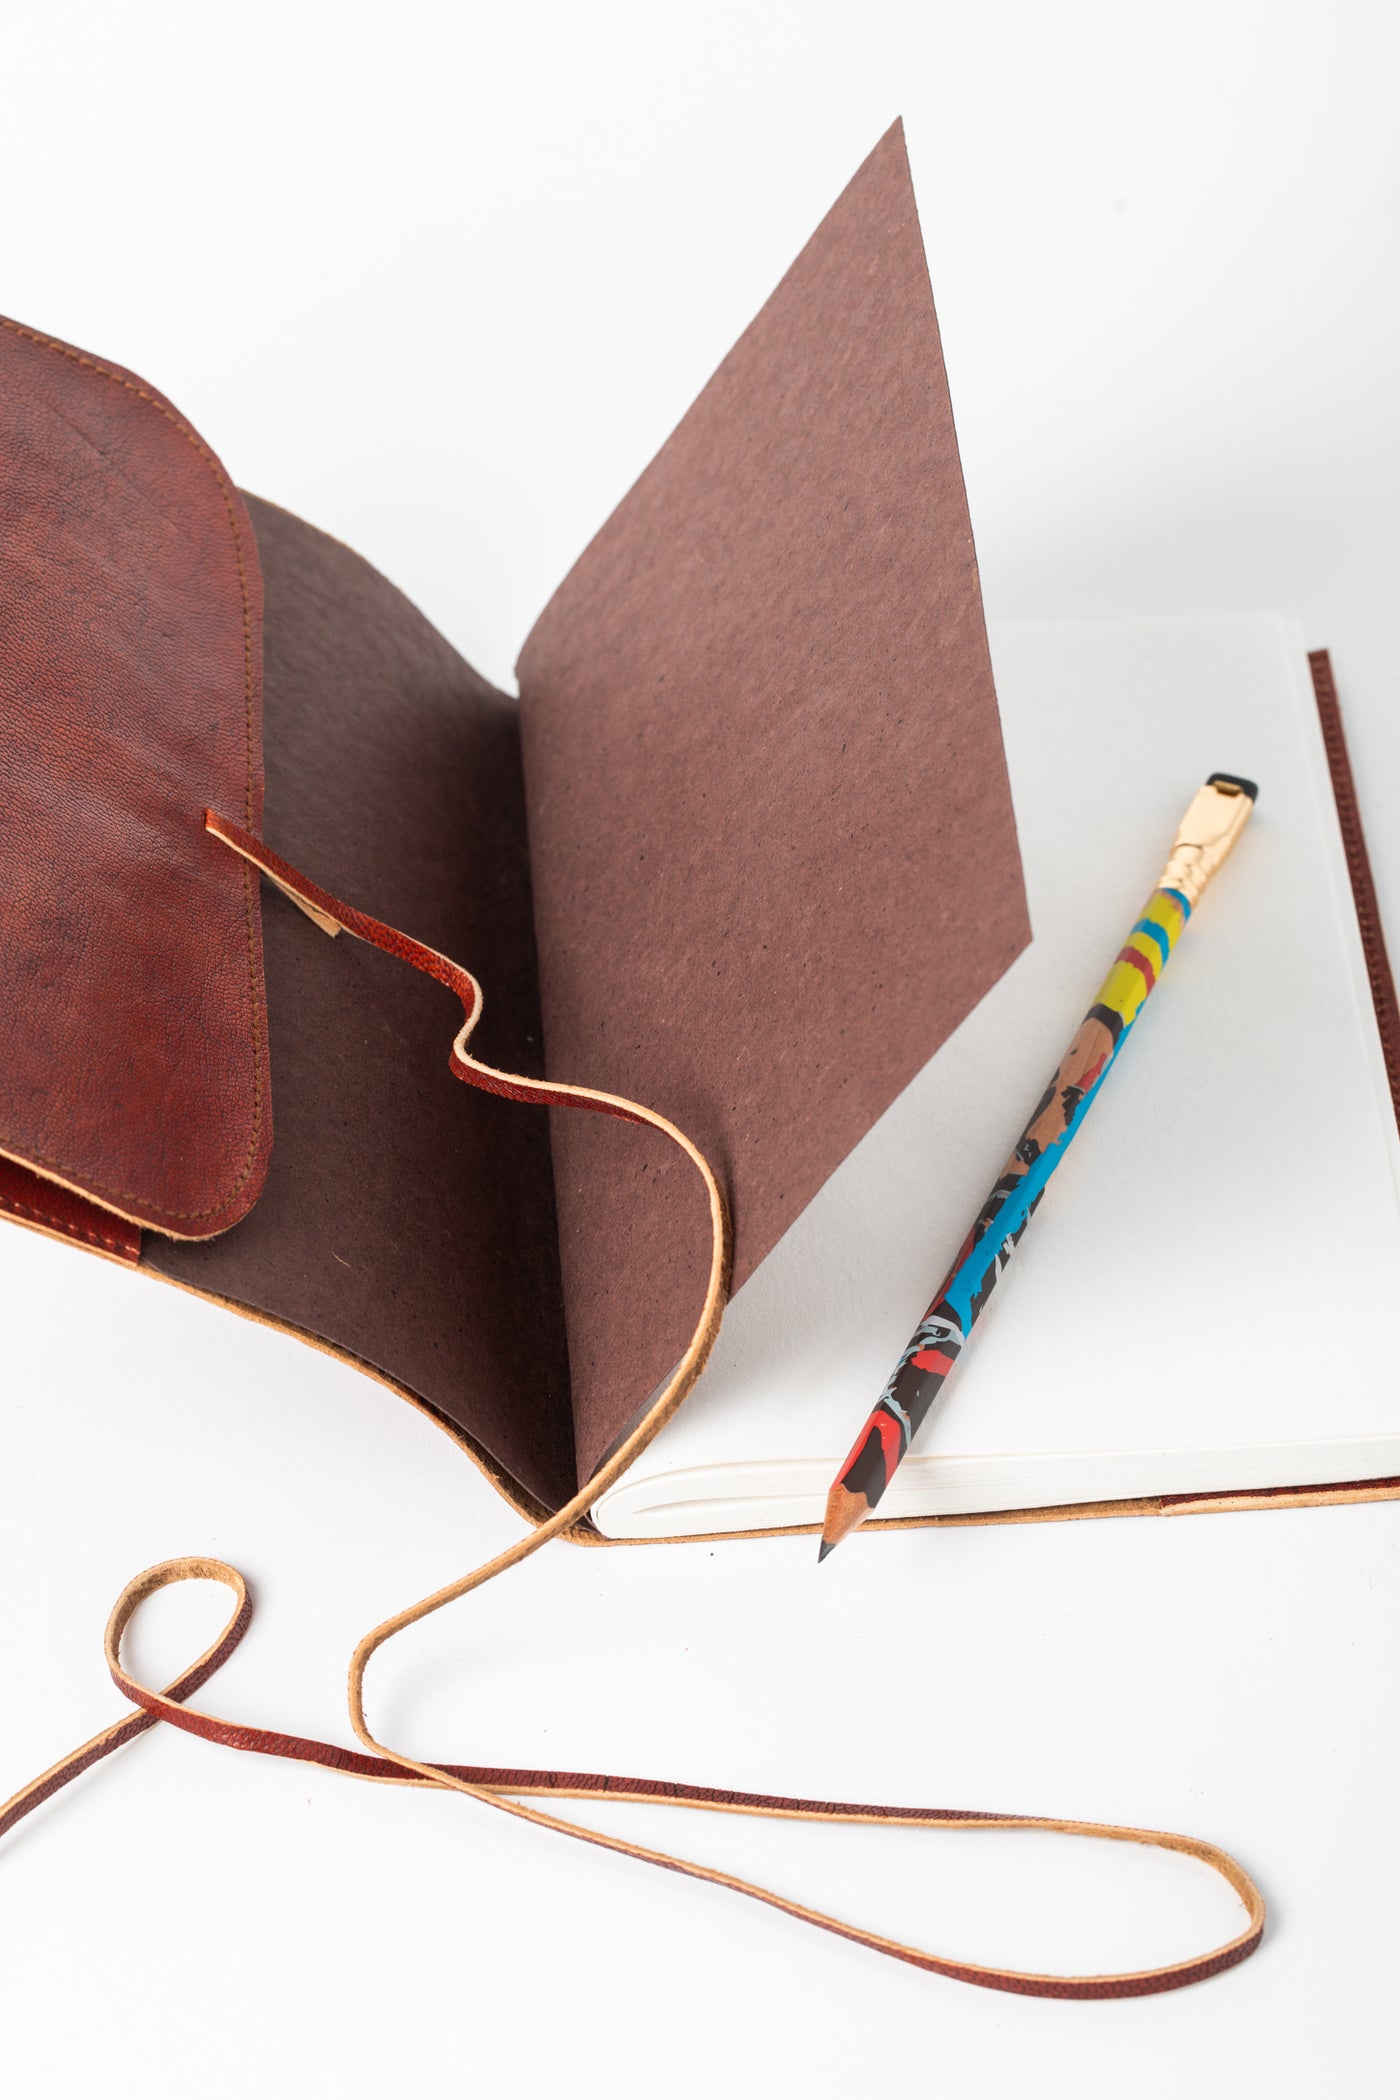 Fold Over Soft Cover Leather Journal